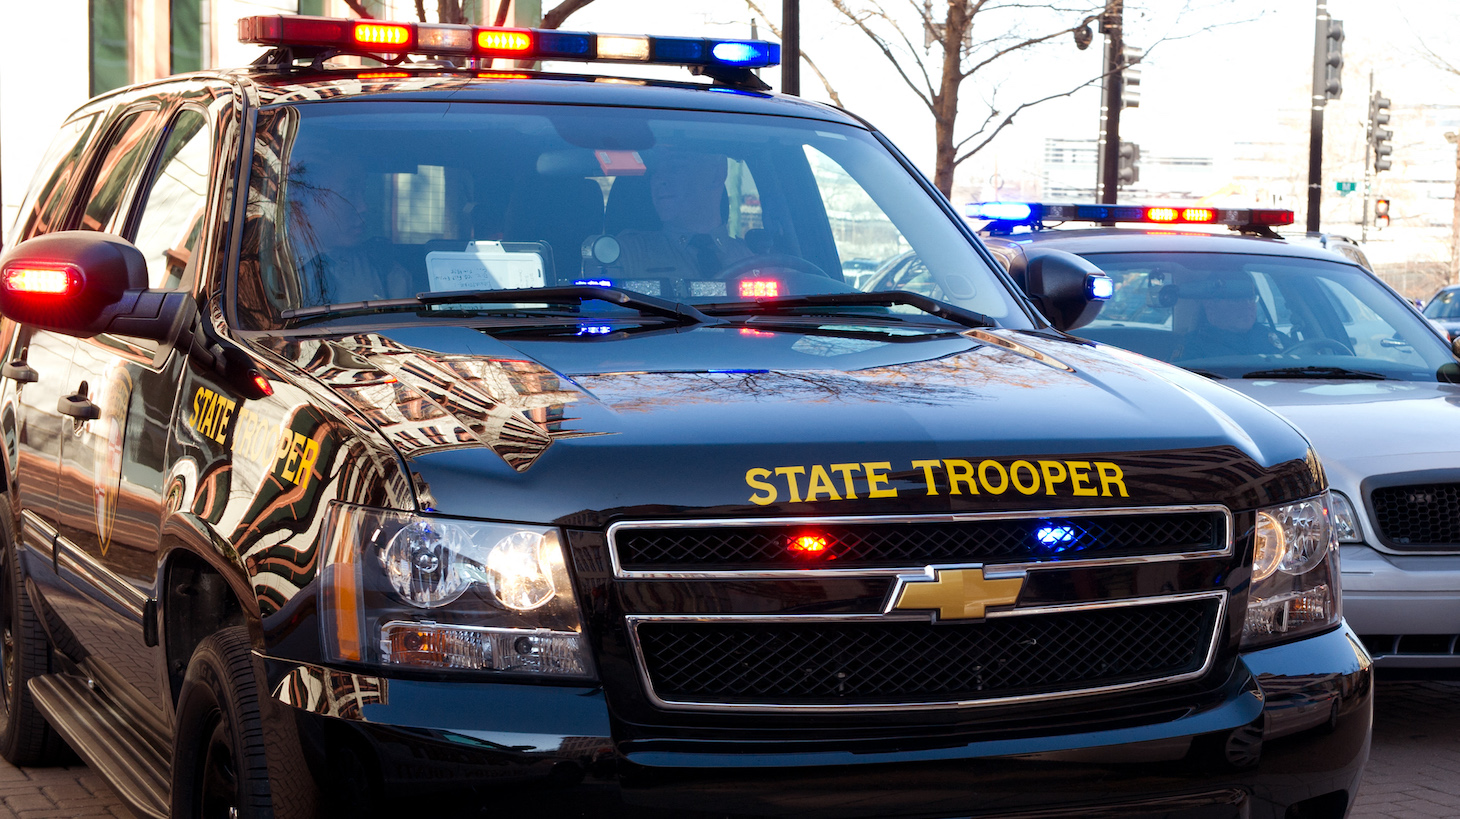 This December 13, 2012 photo shows Maryland State Troopers in their vehicle during an event at the US Department of Transportation in Washington, DC. AFP PHOTO/Karen BLEIER (Photo by KAREN BLEIER / AFP) (Photo by KAREN BLEIER/AFP via Getty Images)